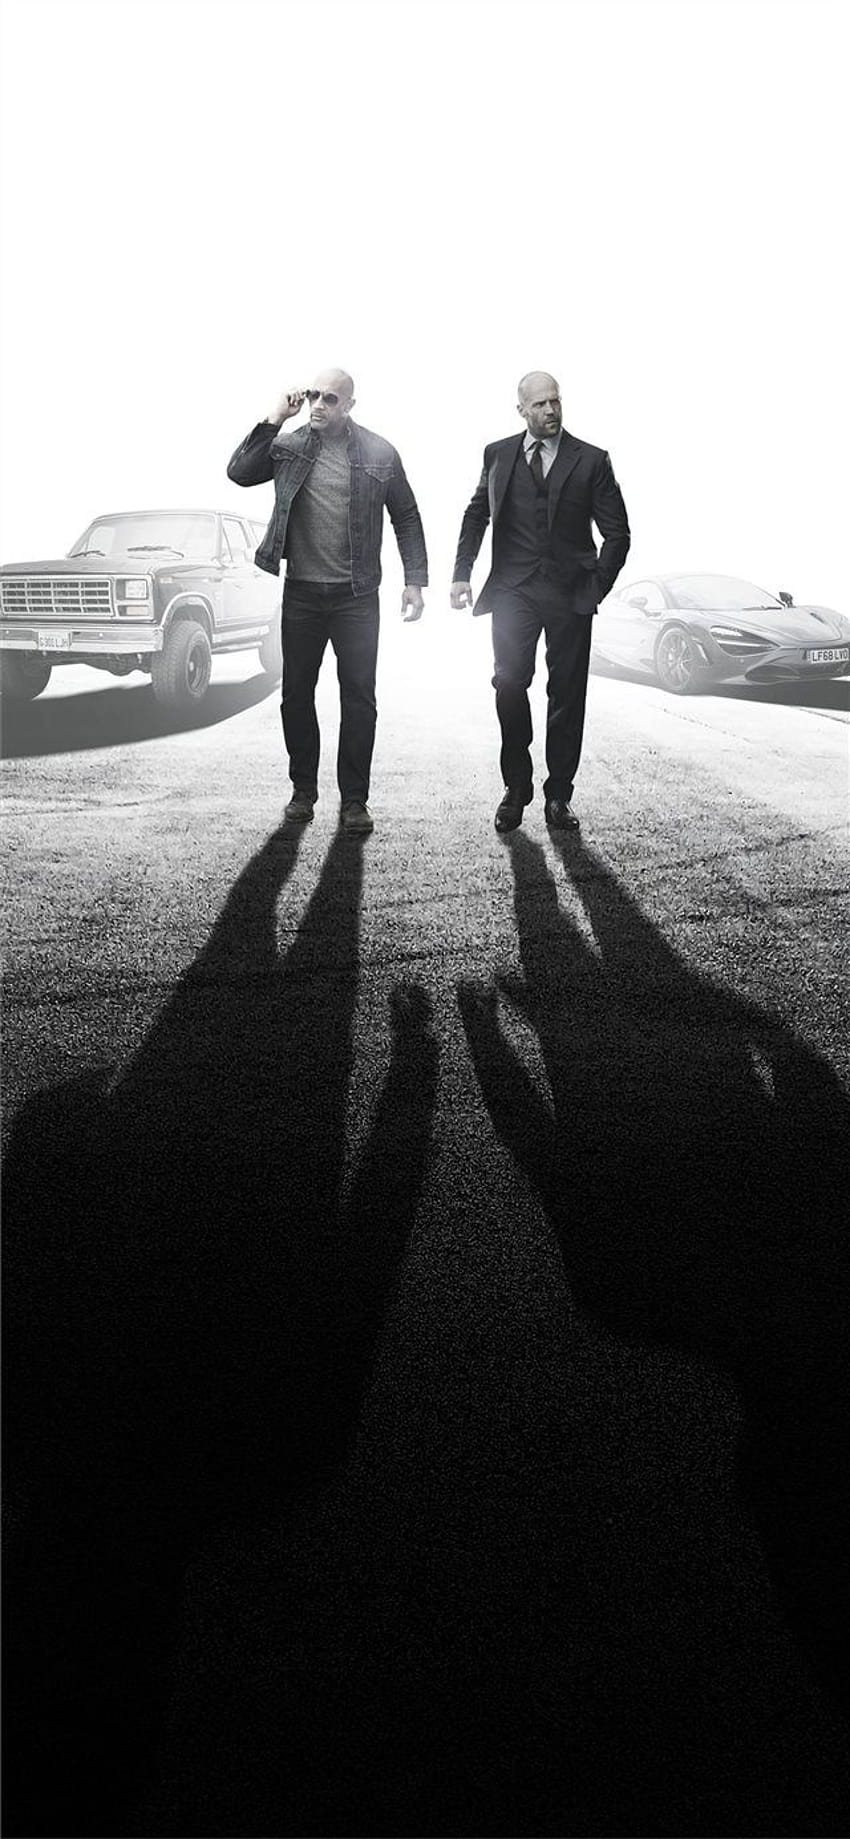 hobbs and shaw imax iPhone X, hobs HD phone wallpaper